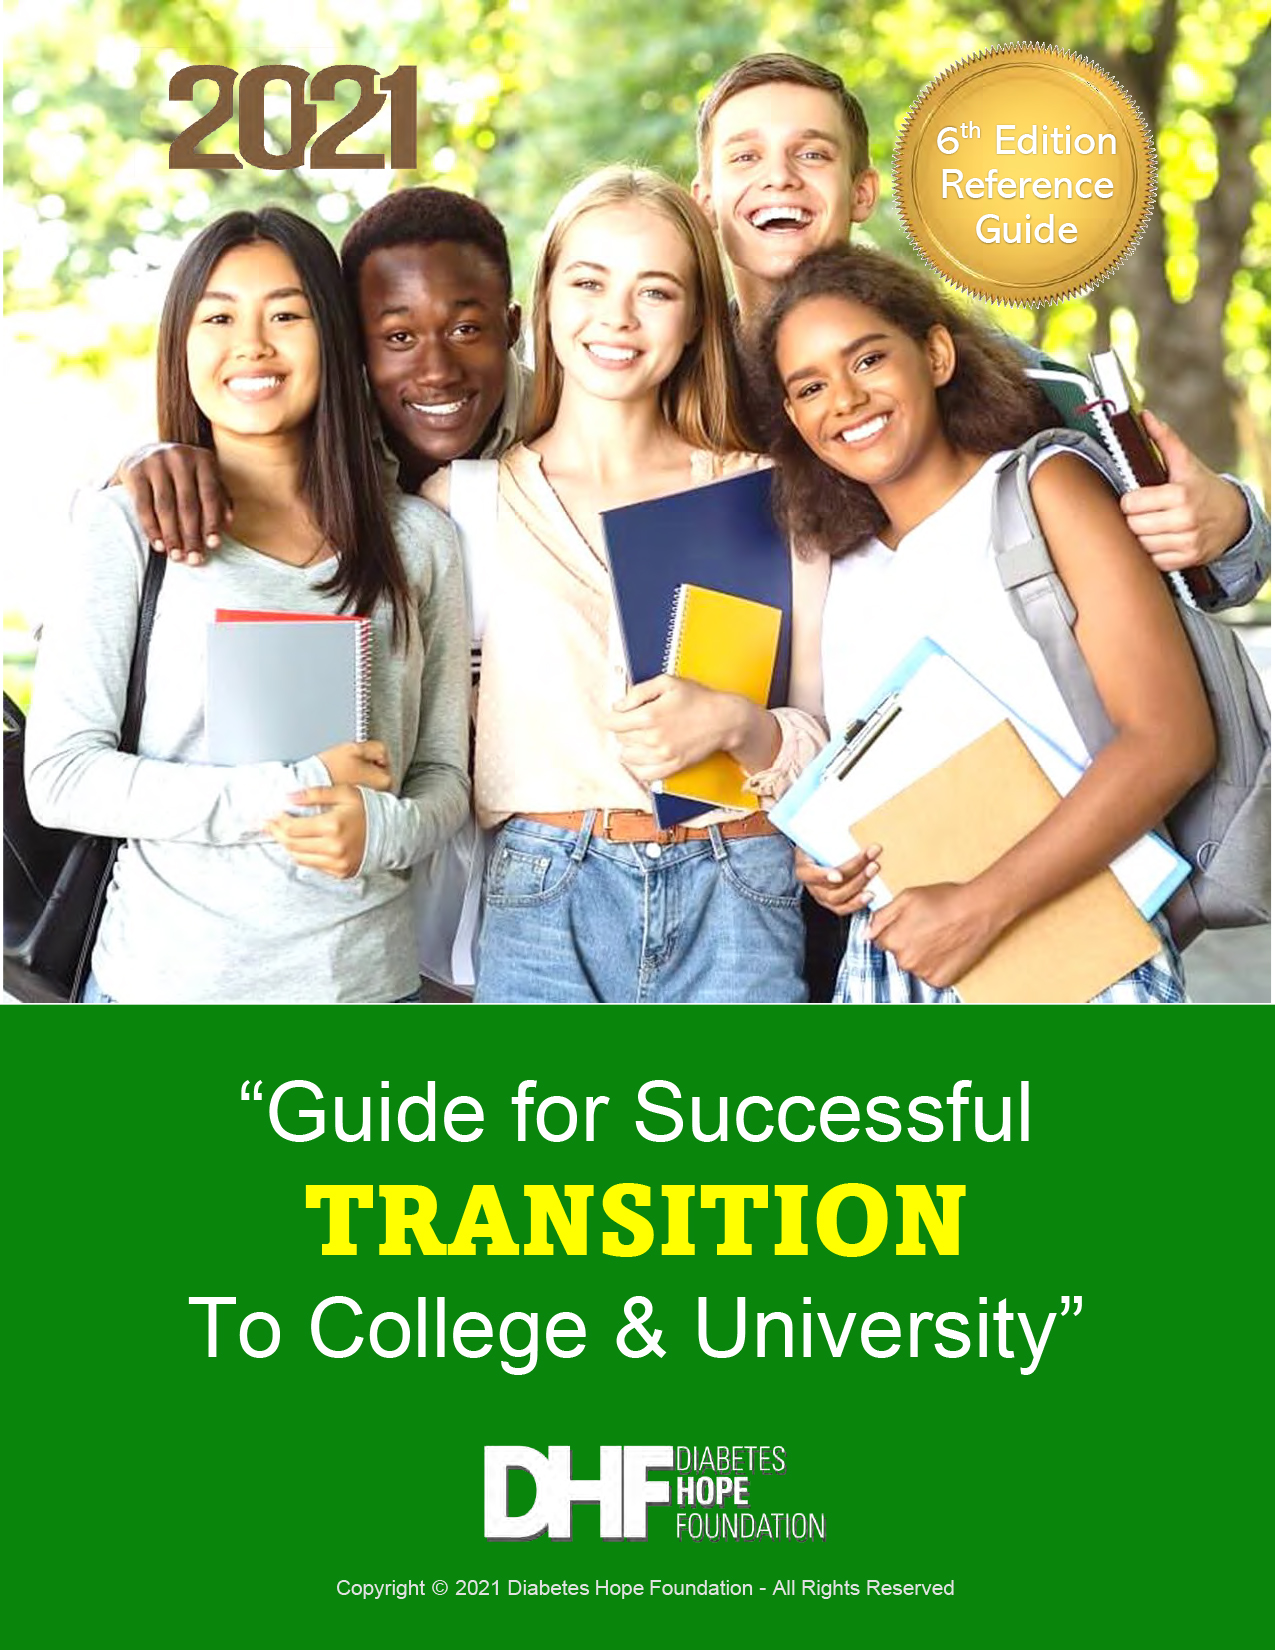 Transition Guide, Transition Resources